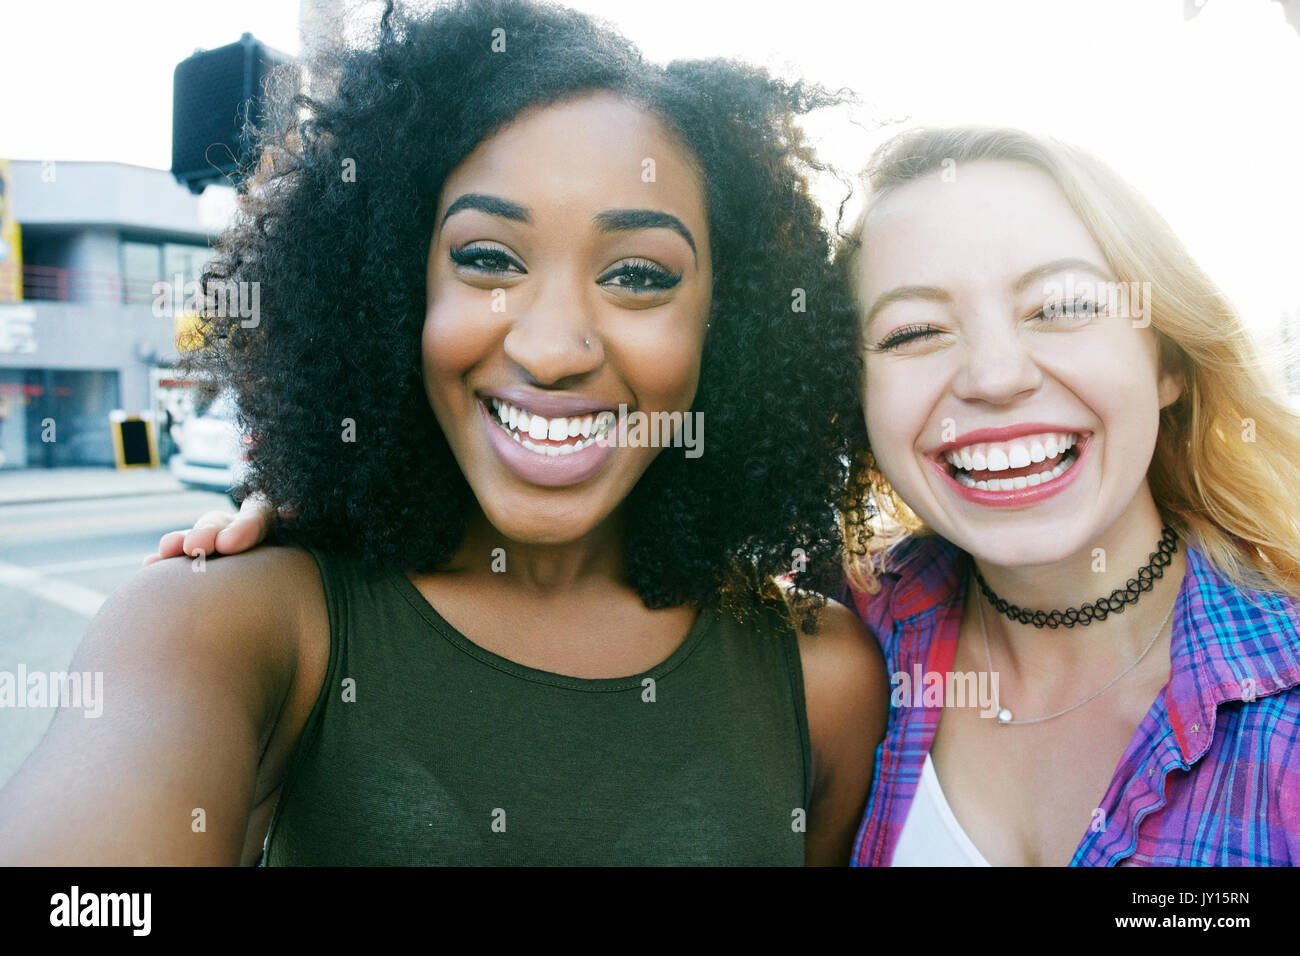 Friends posing for selfie in city Stock Photo